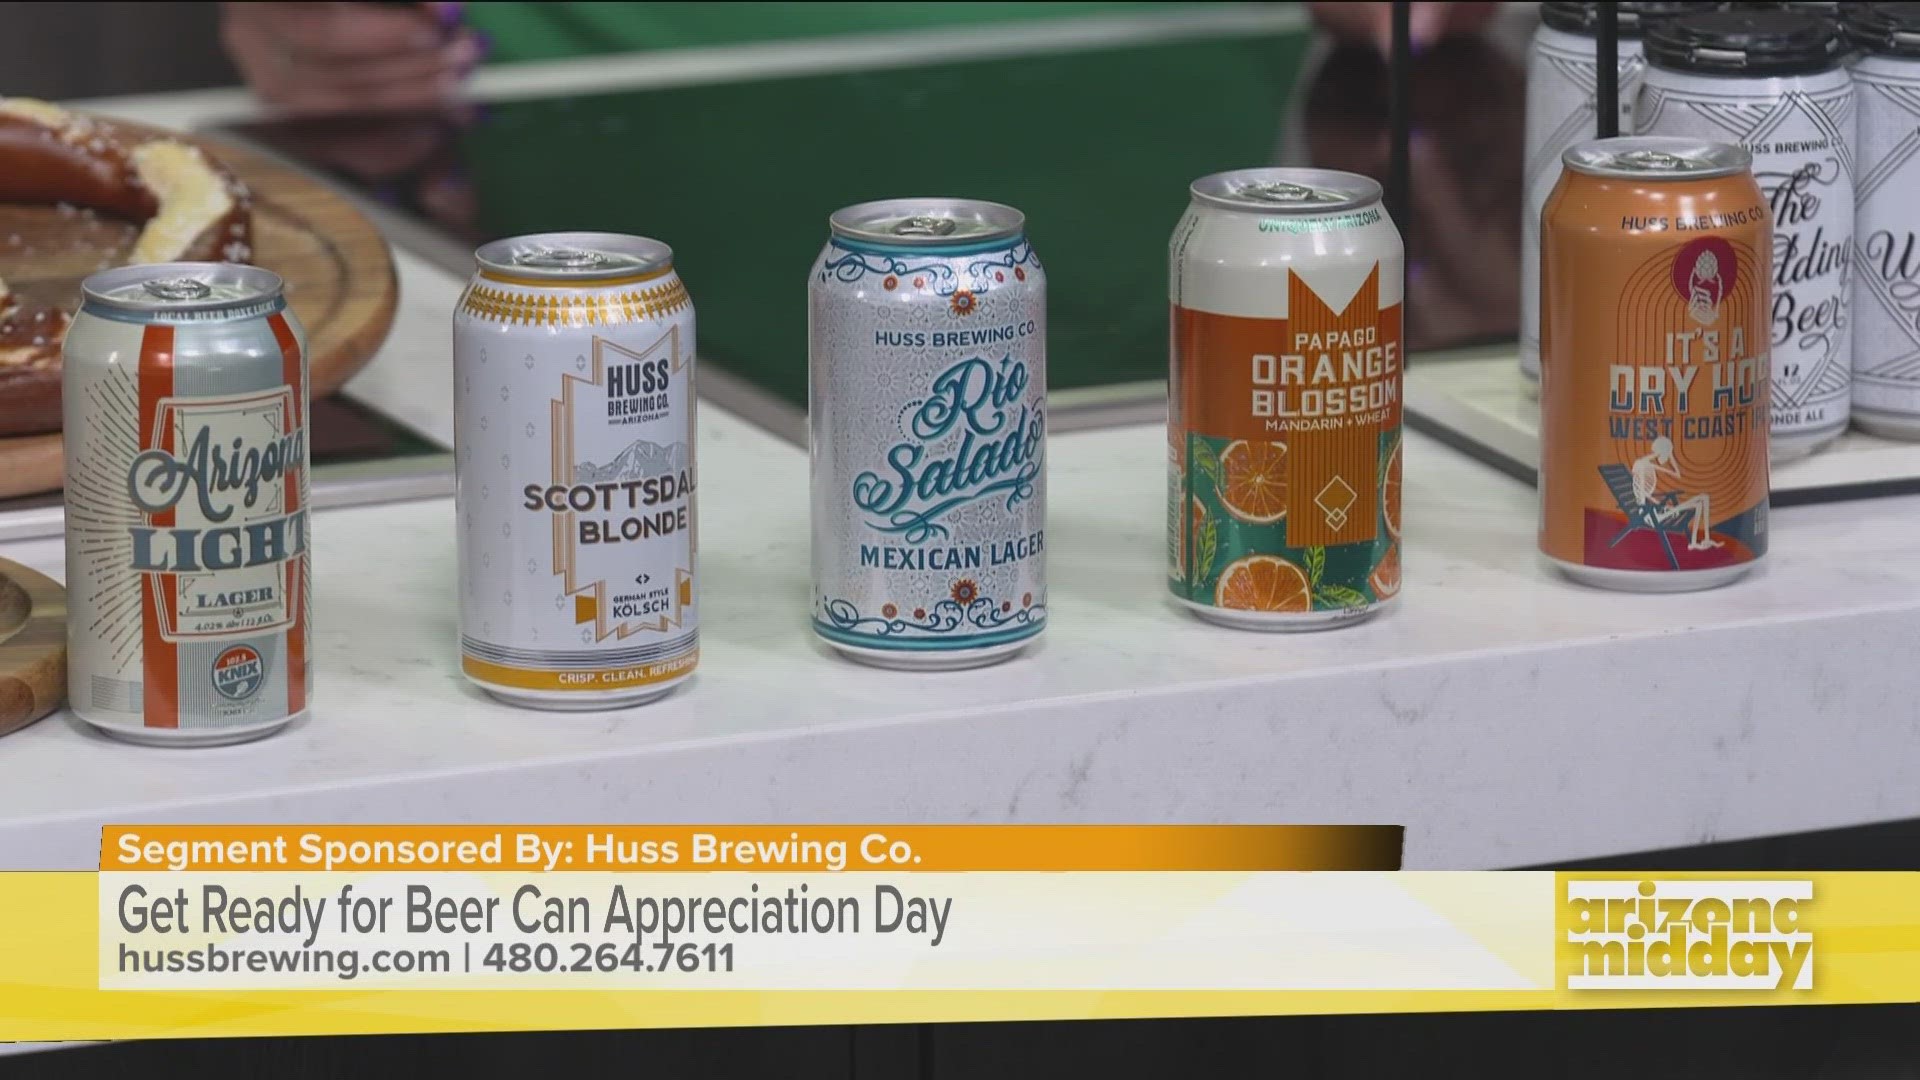 Did you know there was a Beer Can Appreciation Day? Well there is and it’s tomorrow! Craft Beer Hustler Erin Deuble stopped by to give us the scoop.